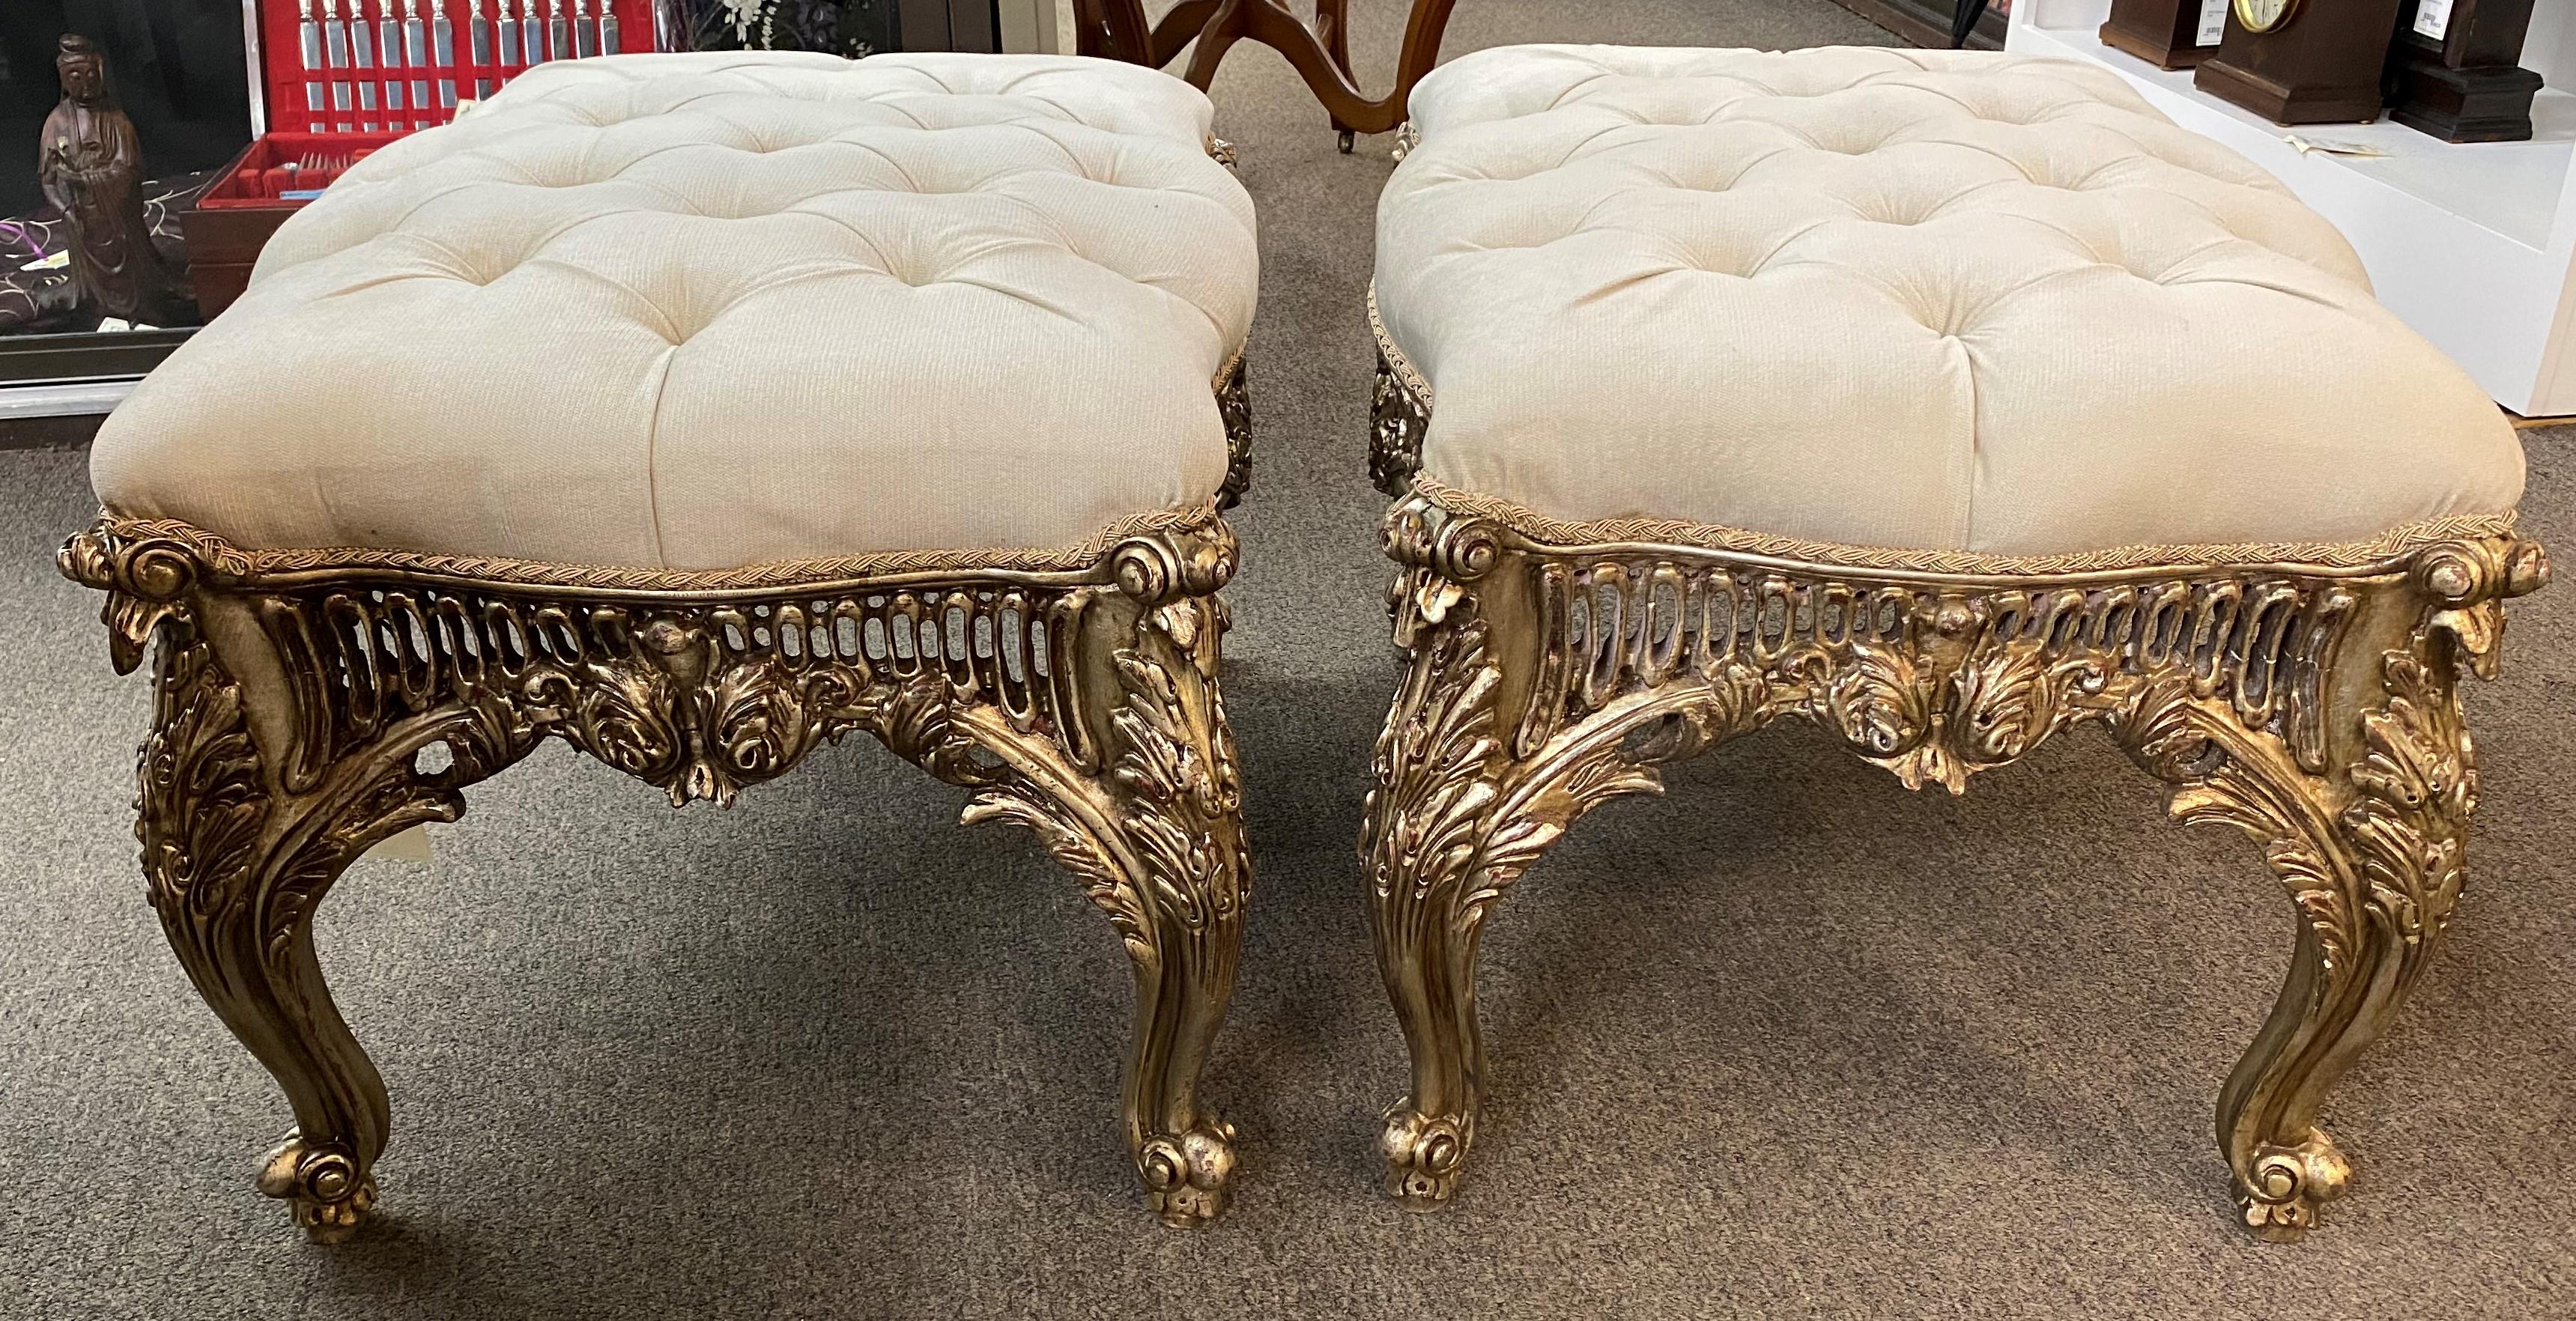 Upholstery Pair of Baroque or Rococo Style Pierce Carved Silvered Ottomans For Sale